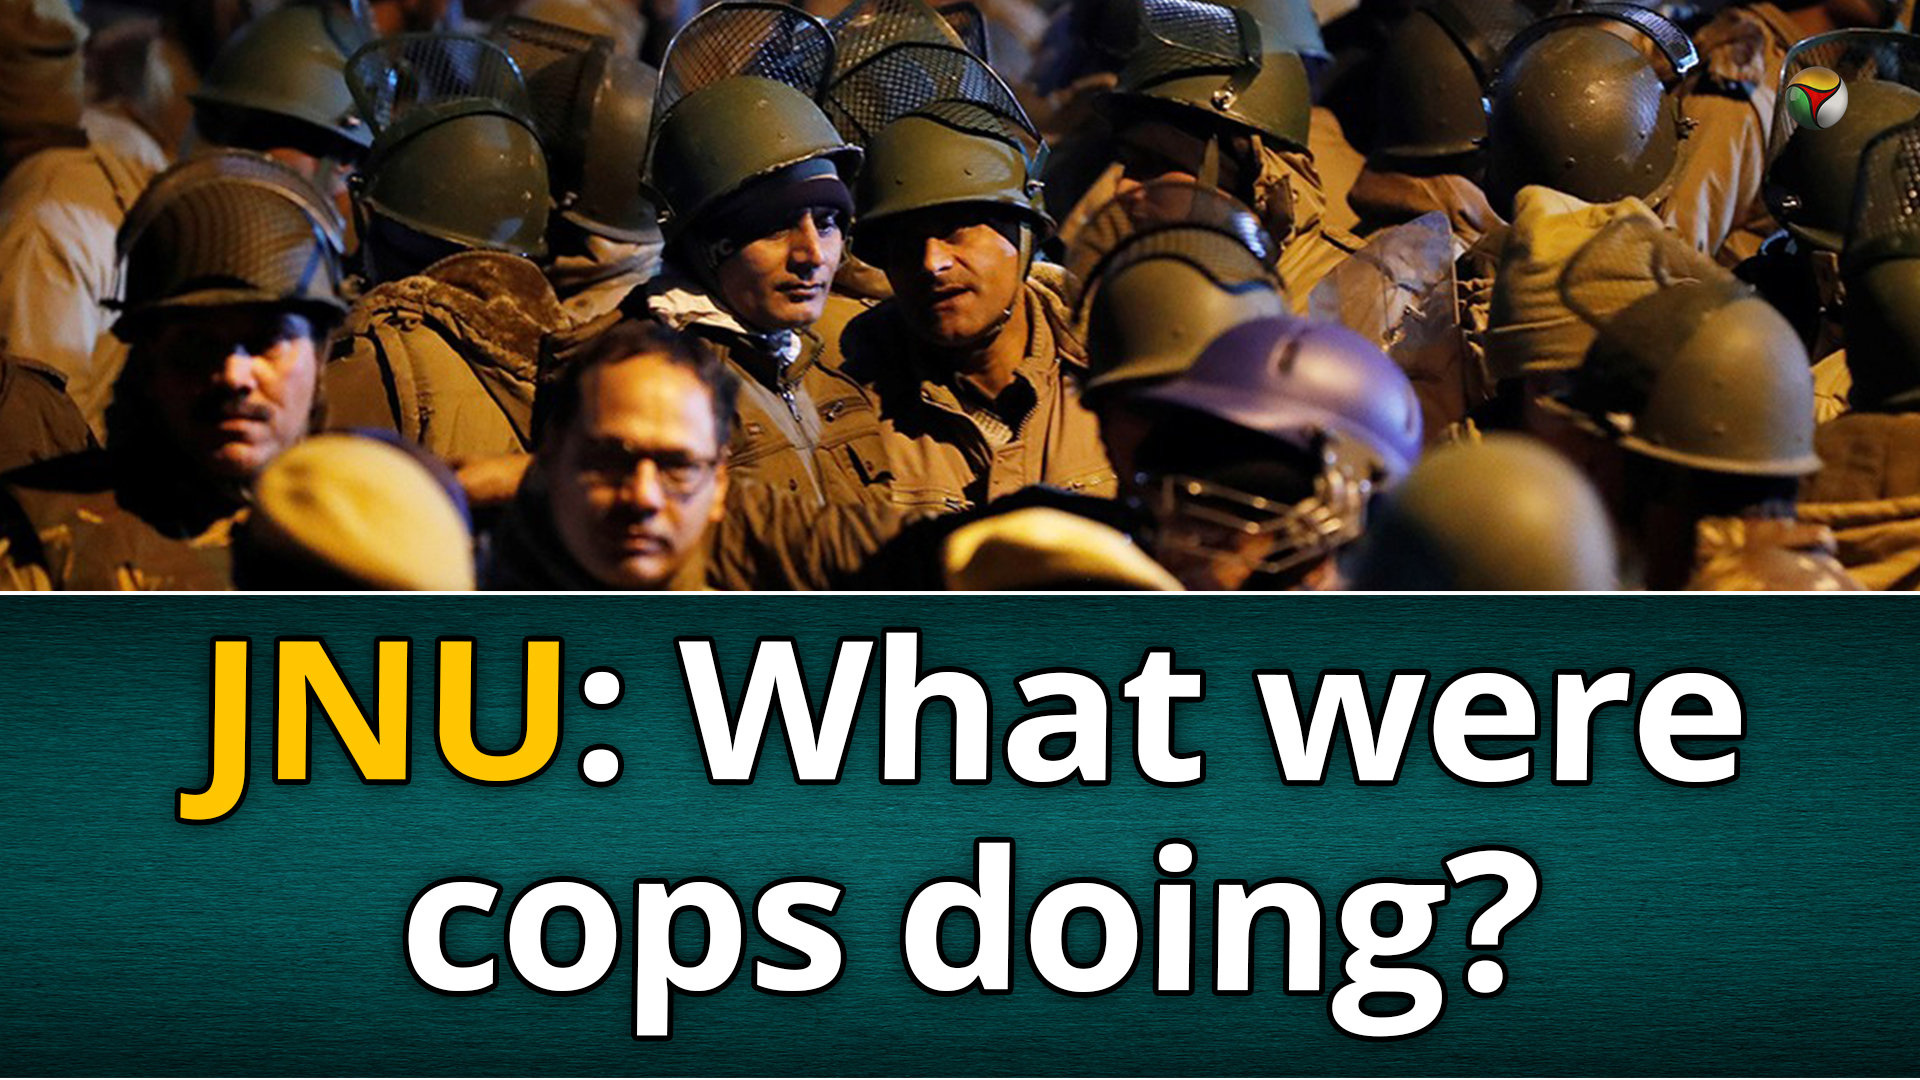 What were cops doing when goons attacked JNU students?